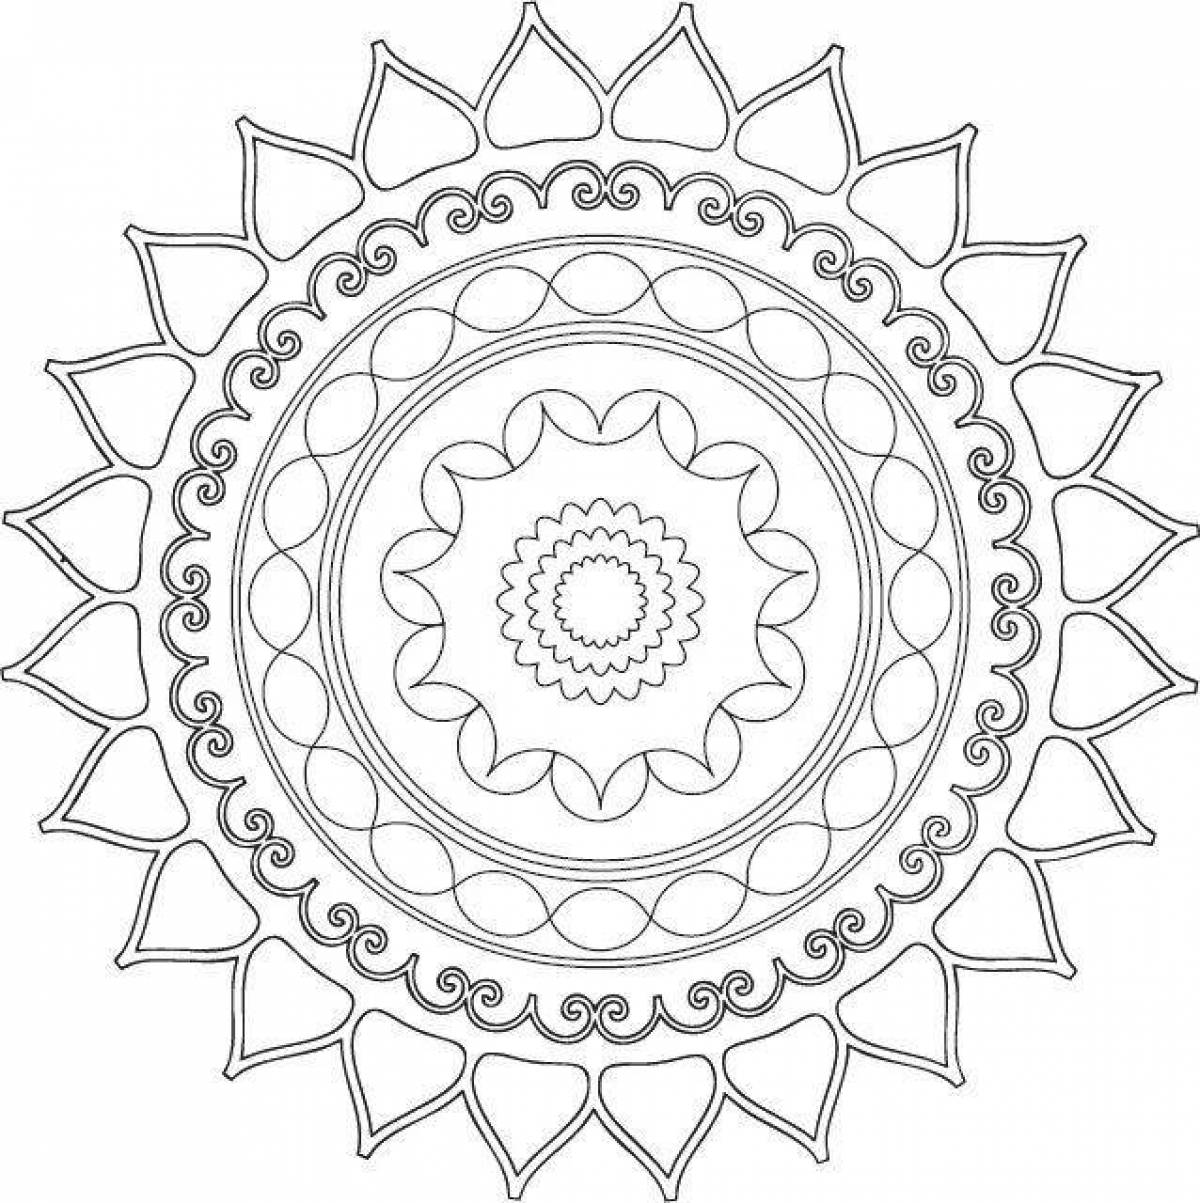 Blissful Health and Wellness Mandala Coloring Page